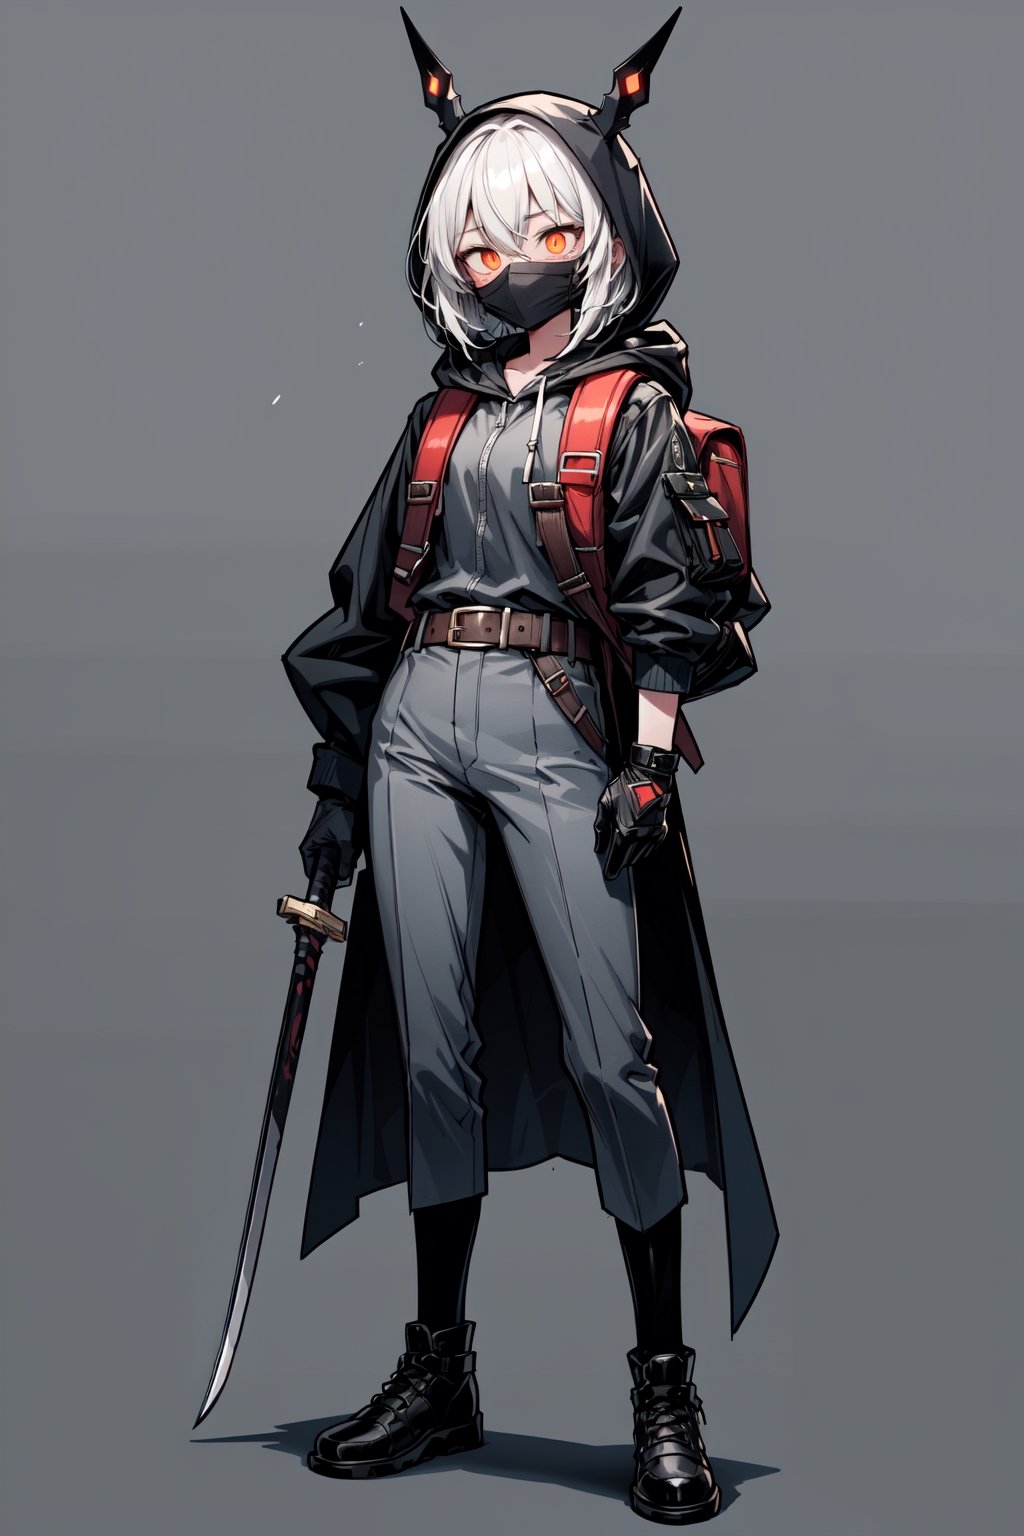 (best qualite), (UHQ, 8k, high resolution), Generate a character design. The character is envisioned as a rogue or assassin, adorned in a gray hooded cloak with a mysterious mask concealing their face. The mask features striking orange glowing eyes. The character is equipped with a backpack, a belt adorned with pouches and an assortment of weapons. In his hand, the wield a sword with a distinctively curved blade. The background is a light gray color, featuring various sketches depicting the character in different dynamic poses.,1girl,solo